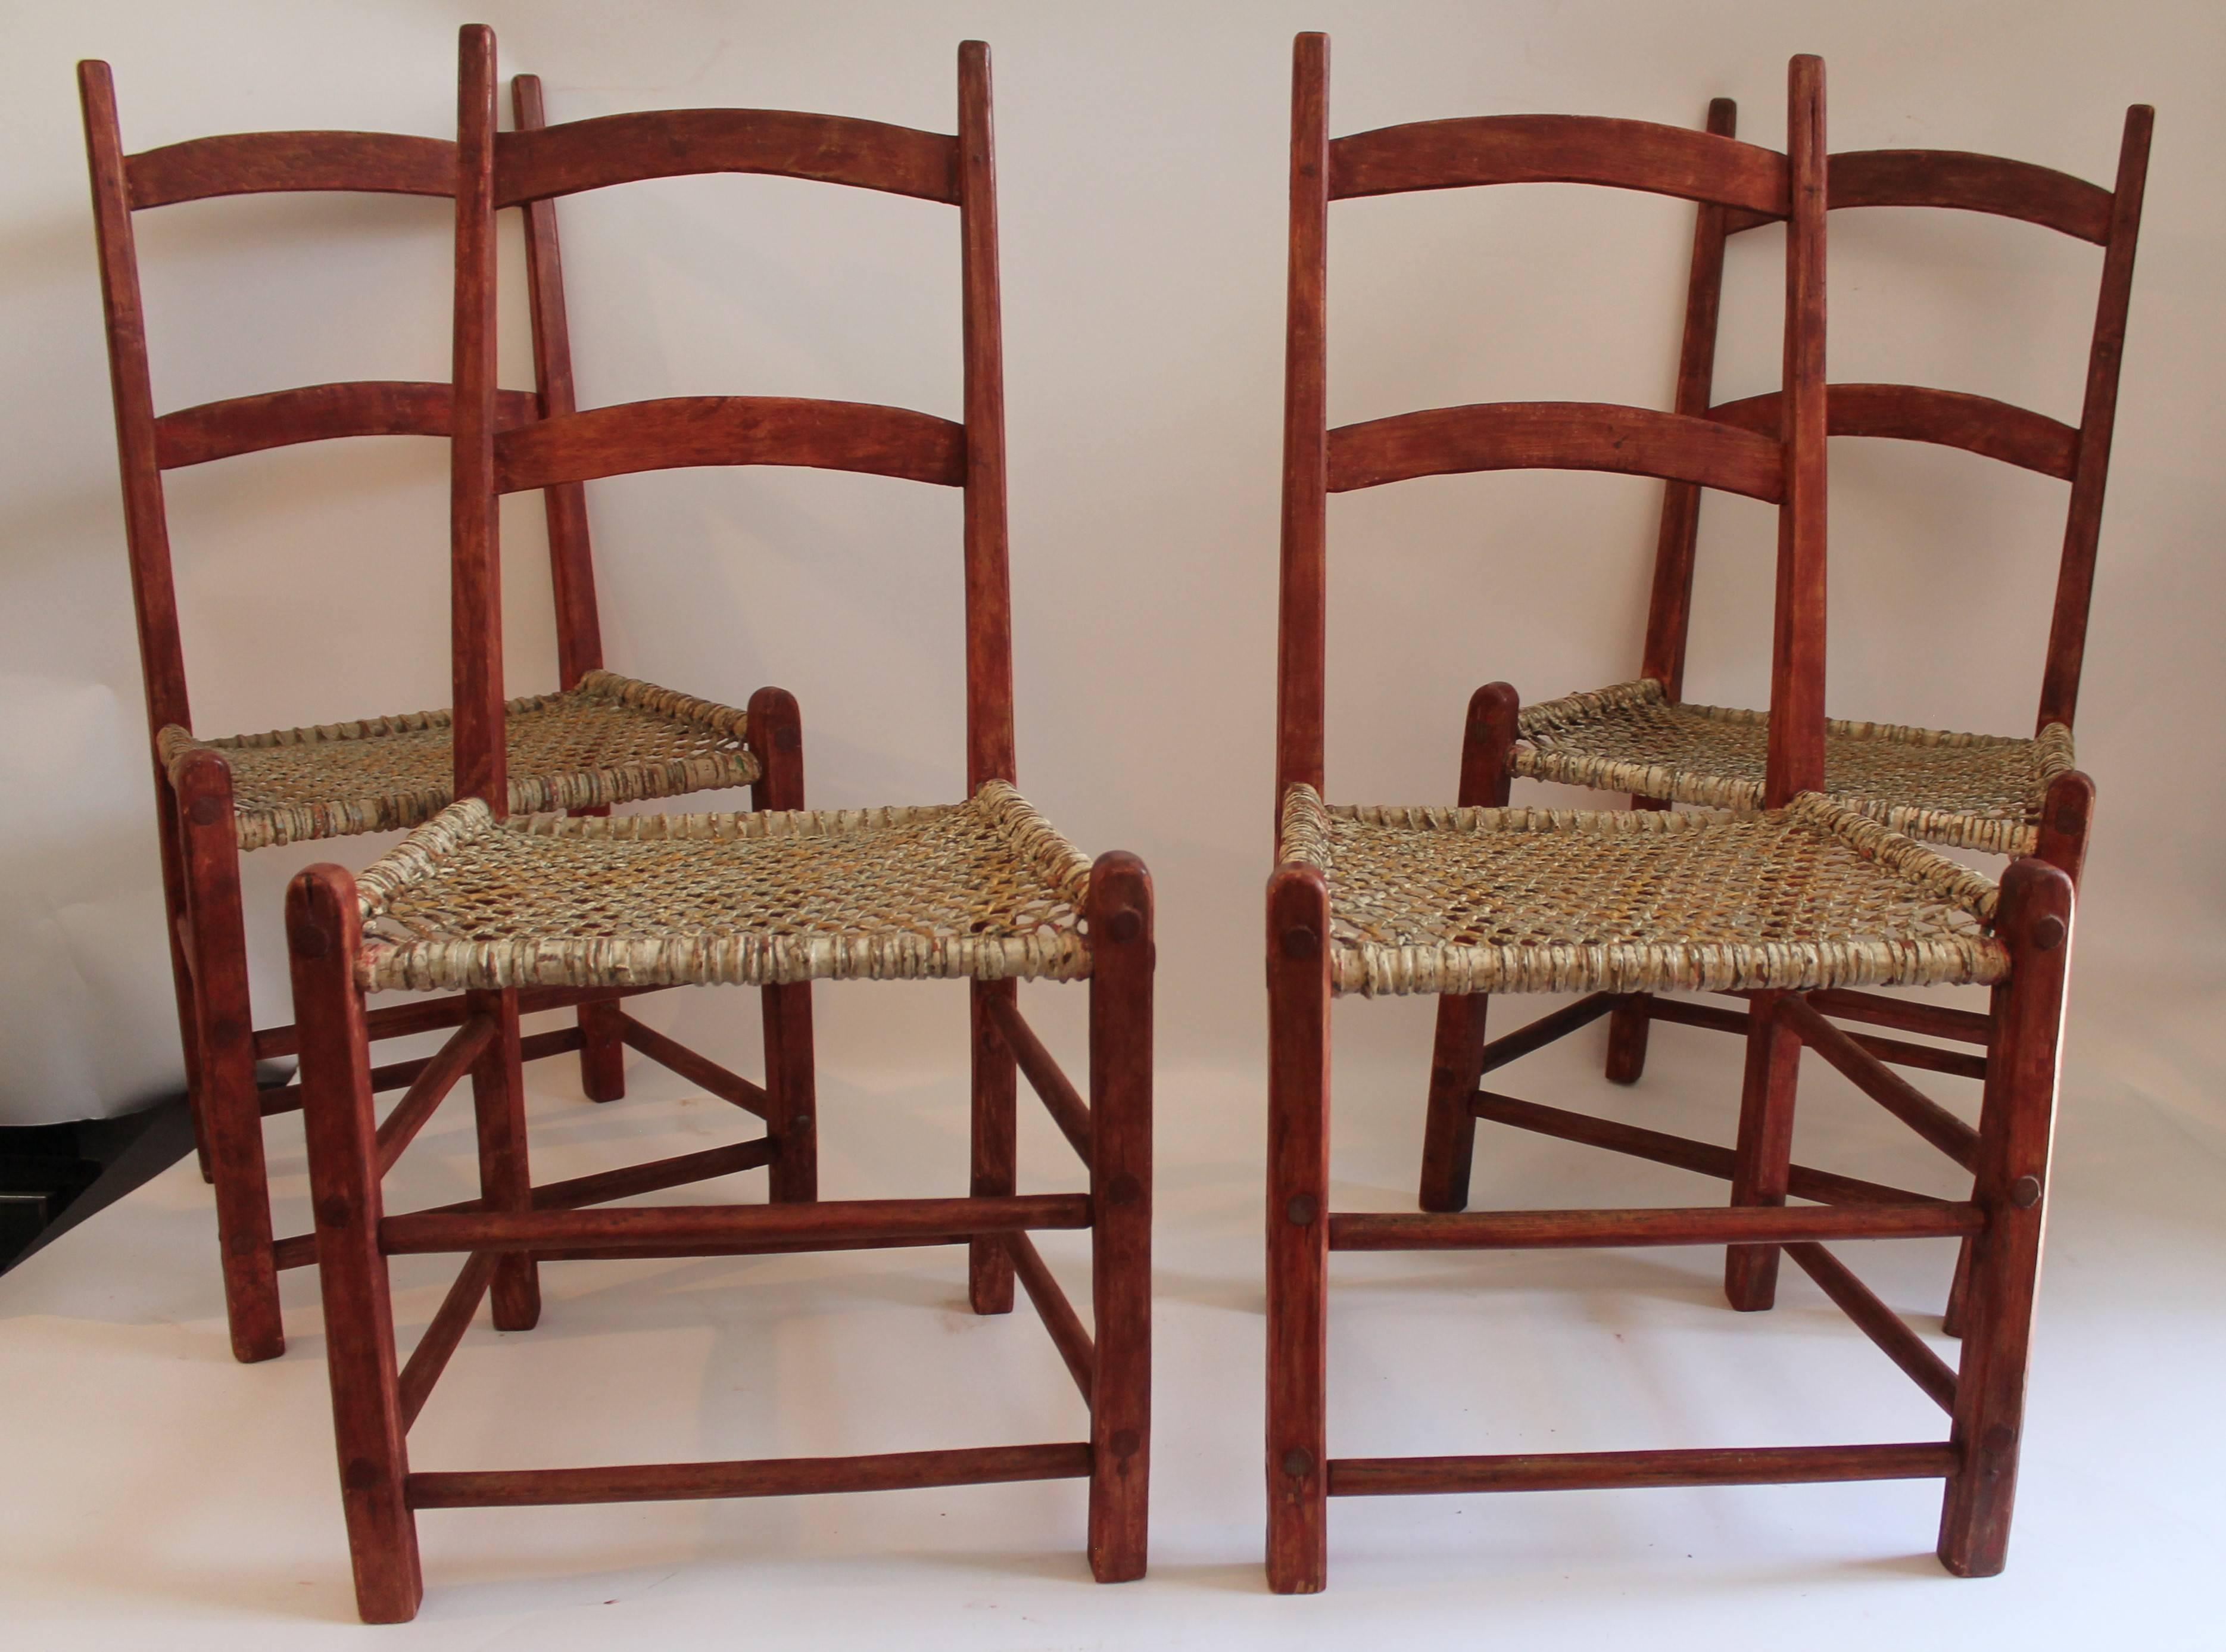 These folky red painted ladder back chairs from Canada are in good sturdy condition and they retain the original white painted rawhide seats. Seat height is 15 inches. They have a bittersweet/redish surface. Set of four are all in good condition.